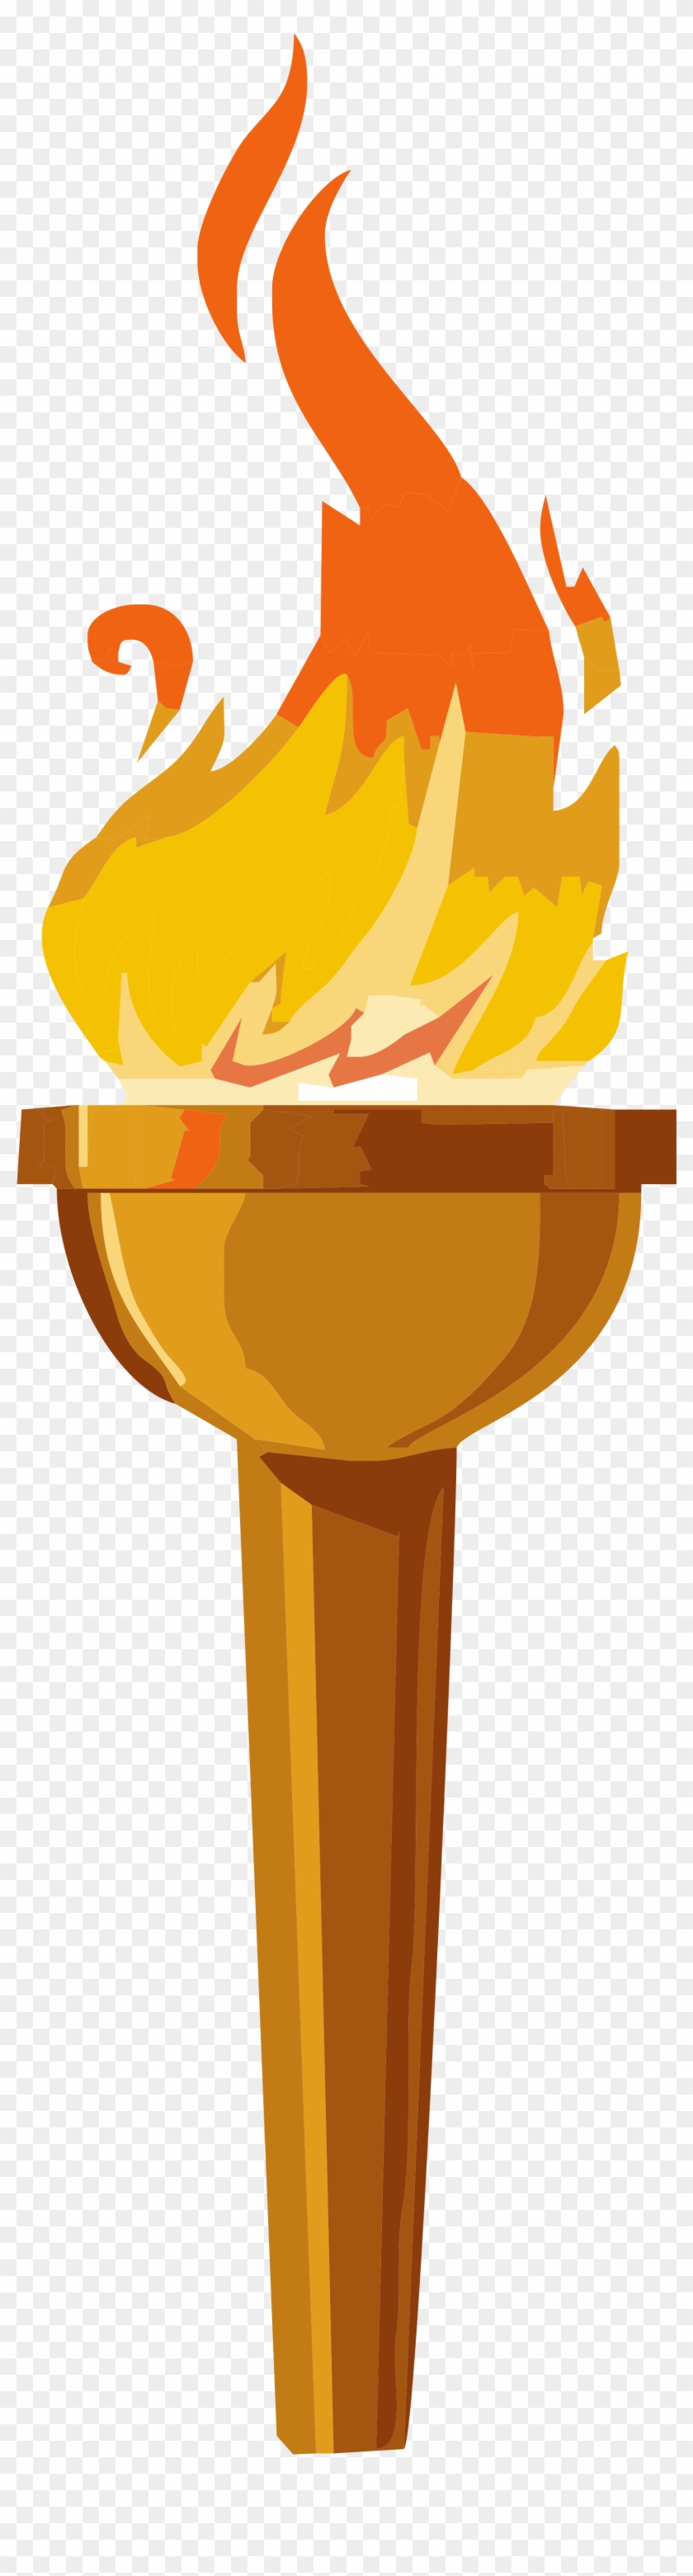 Flashlight Clipart Phone - Olympic Torch Clip Art - Png Download #46902